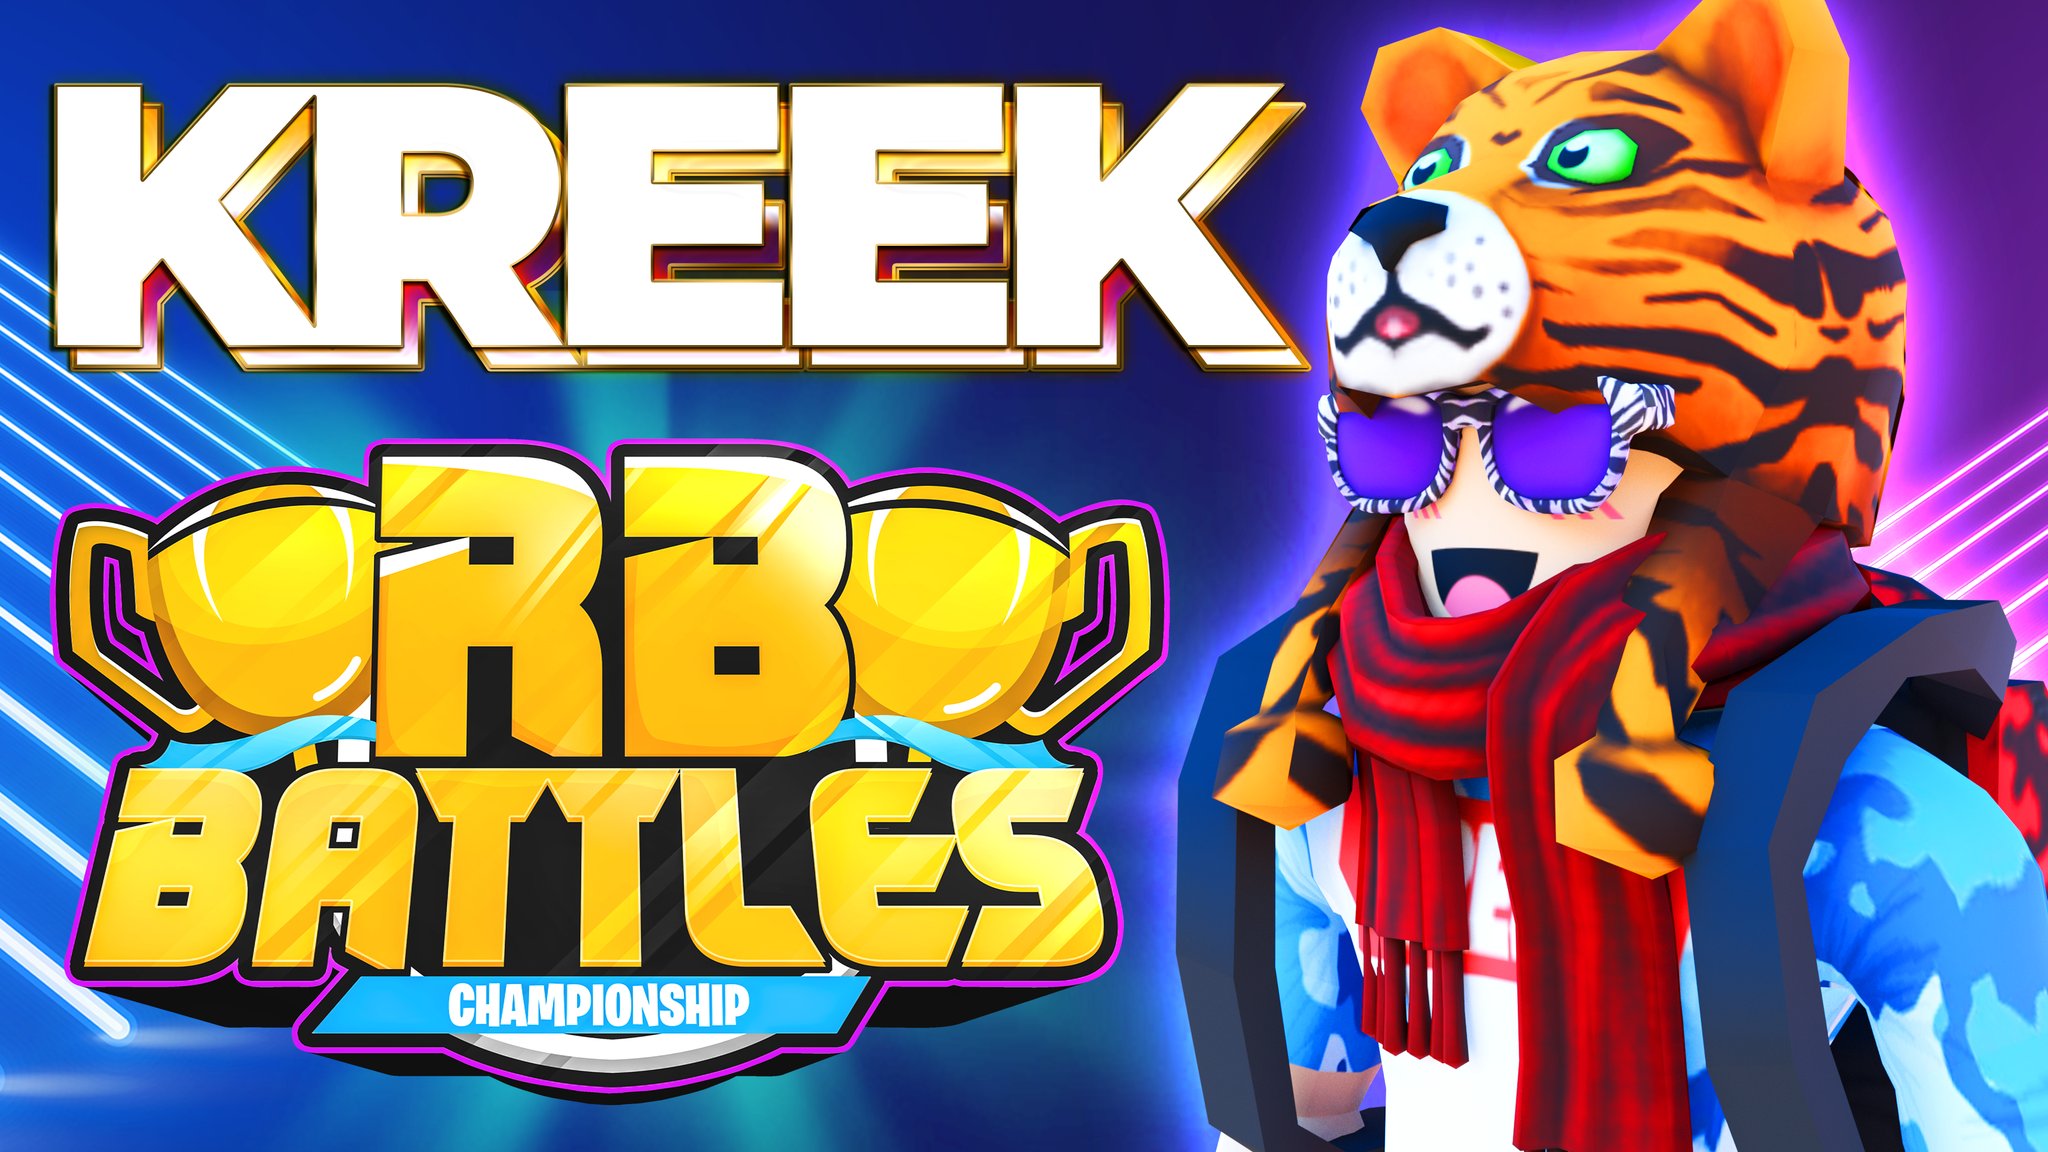 Roblox Battles On Twitter The Next Guest Joining The Rb Battles Tournament Is Kreekcraft We Re Revealing A New Tournament Guest Daily Any Guesses Who Else Will Be In The Tournament - roblox on twitter we want to host more roblox tournaments